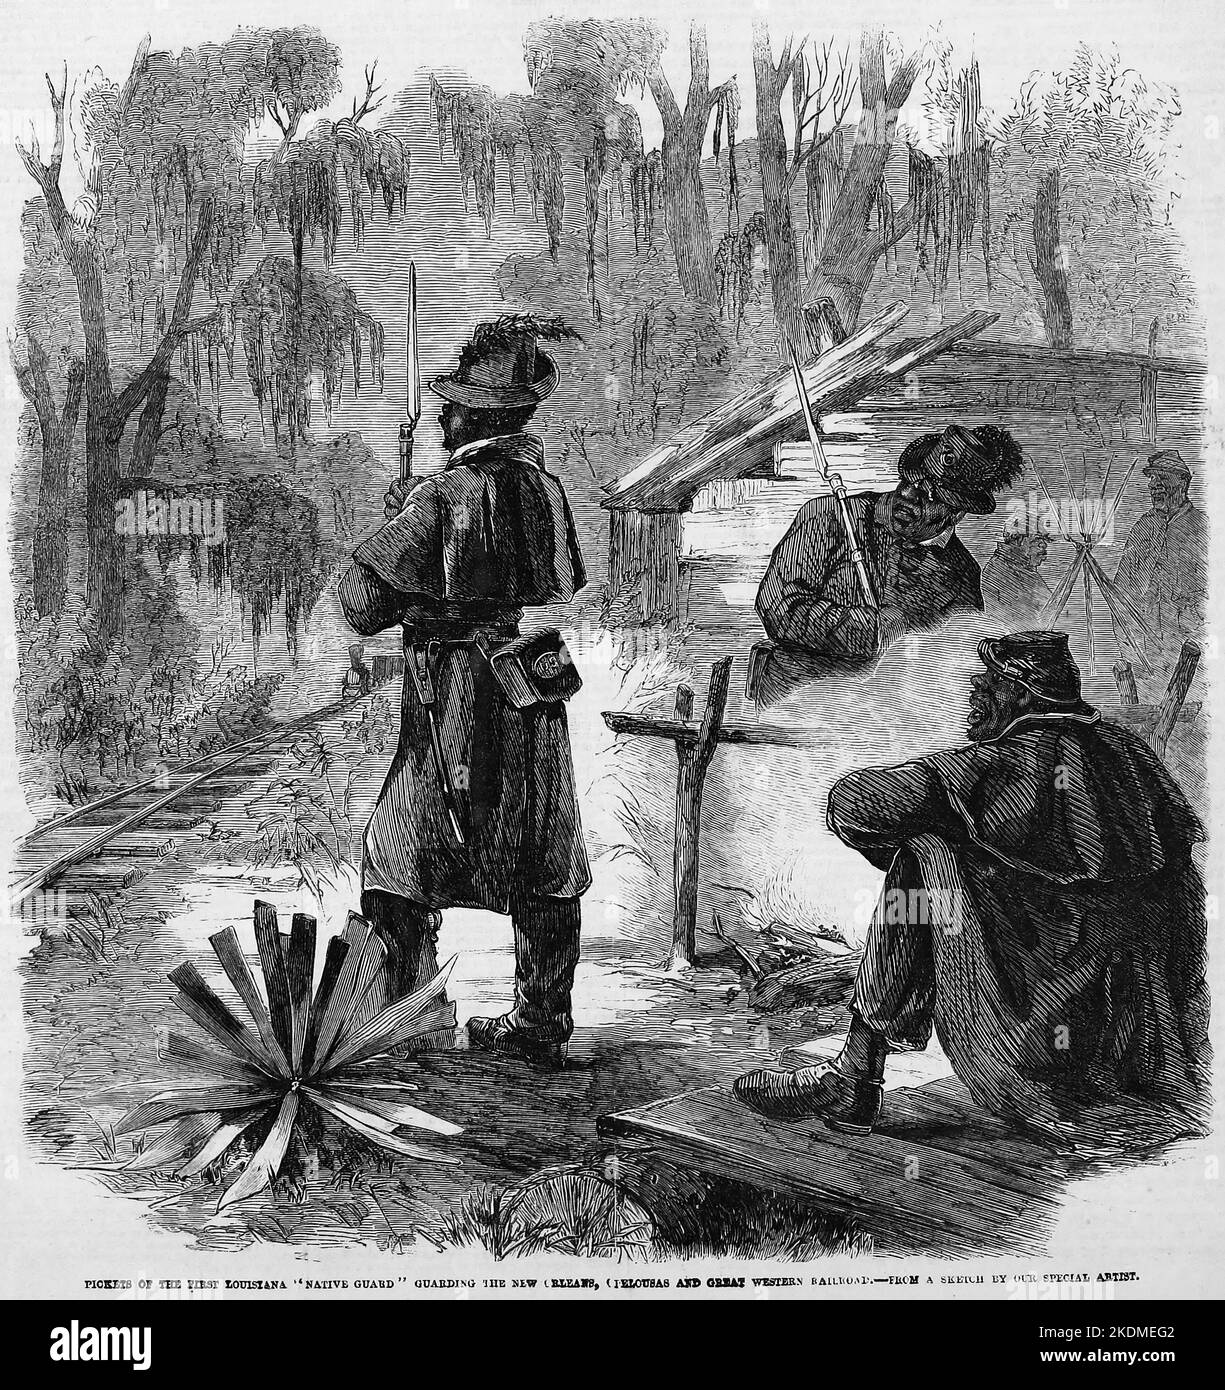 Pickets of the first Louisiana 'Native Guard' guarding the New Orleans, Opelousas and Great Western Railroad. February 1863. 19th century American Civil War illustration from Frank Leslie's Illustrated Newspaper Stock Photo